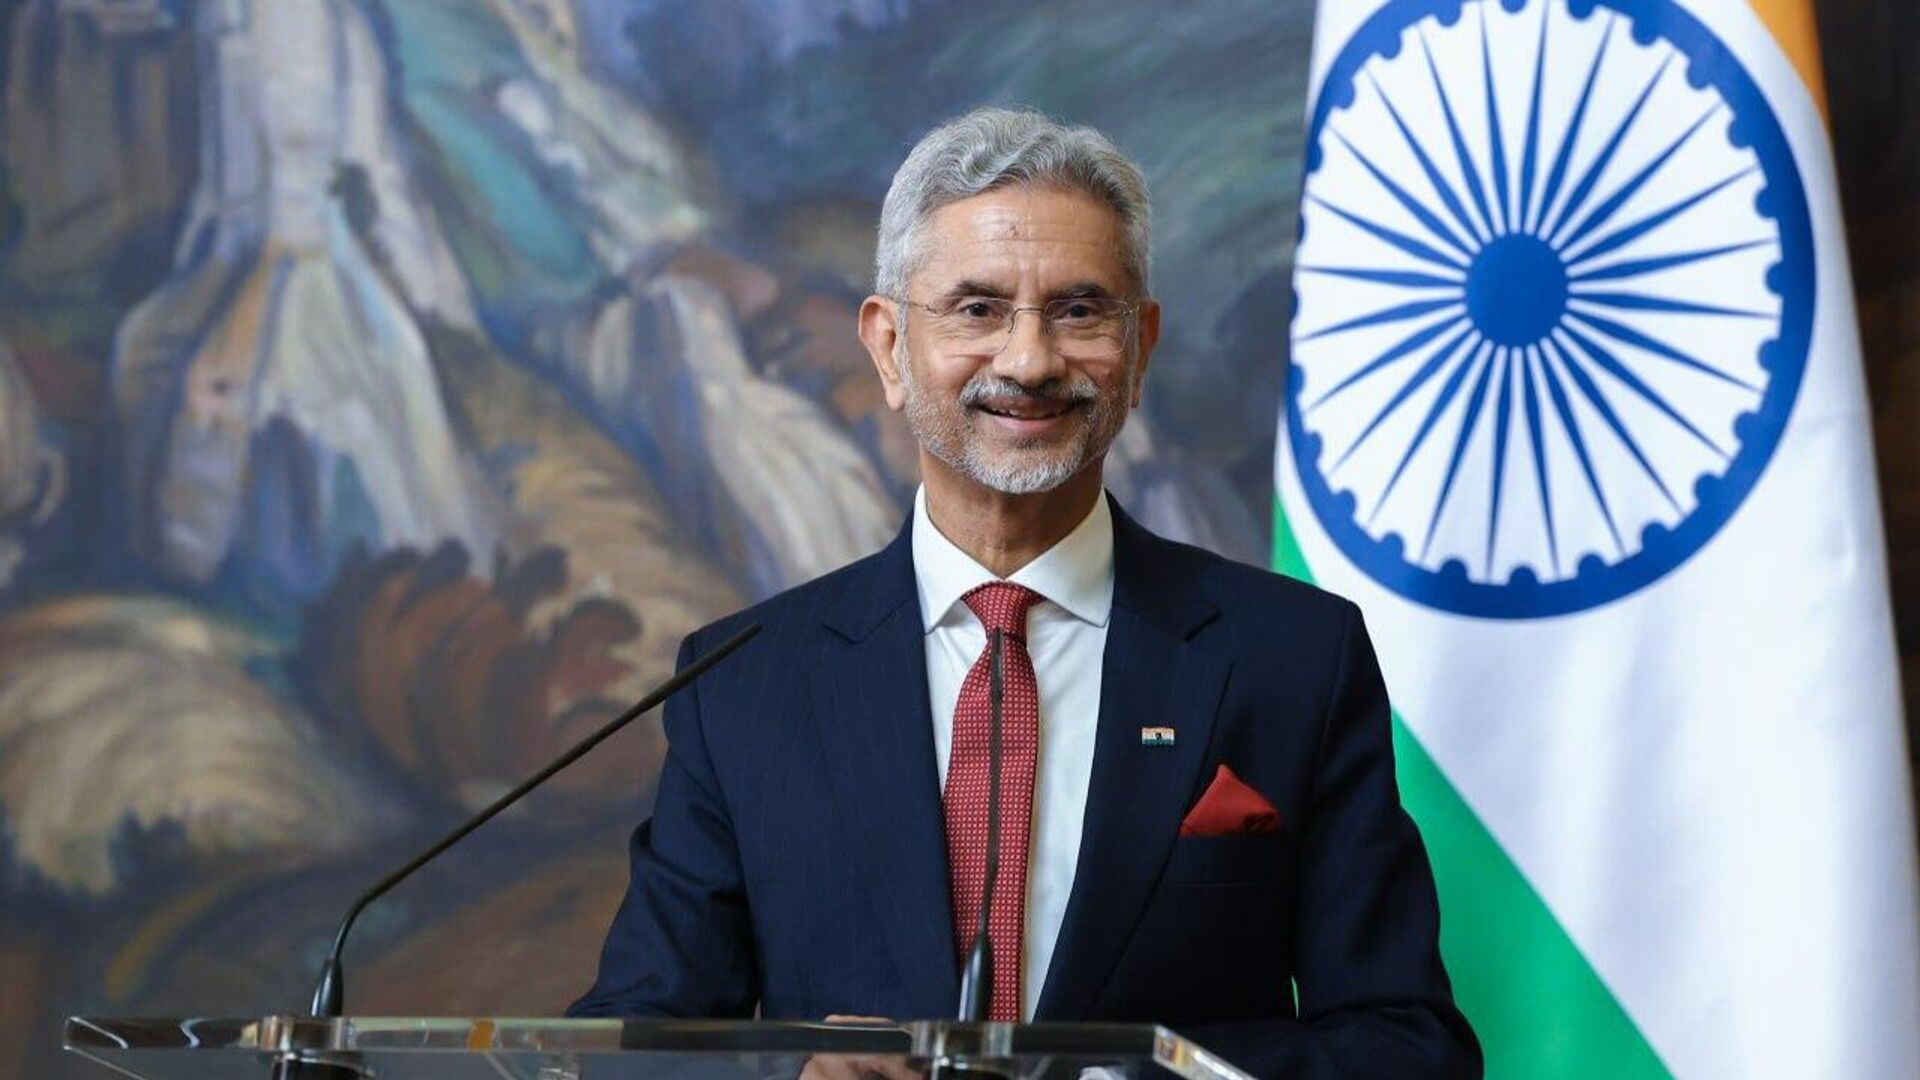 S Jaishankar highlighted India's evolving approach to challenges like terrorism and border disputes, emphasizing the nation's stance as principled yet robust